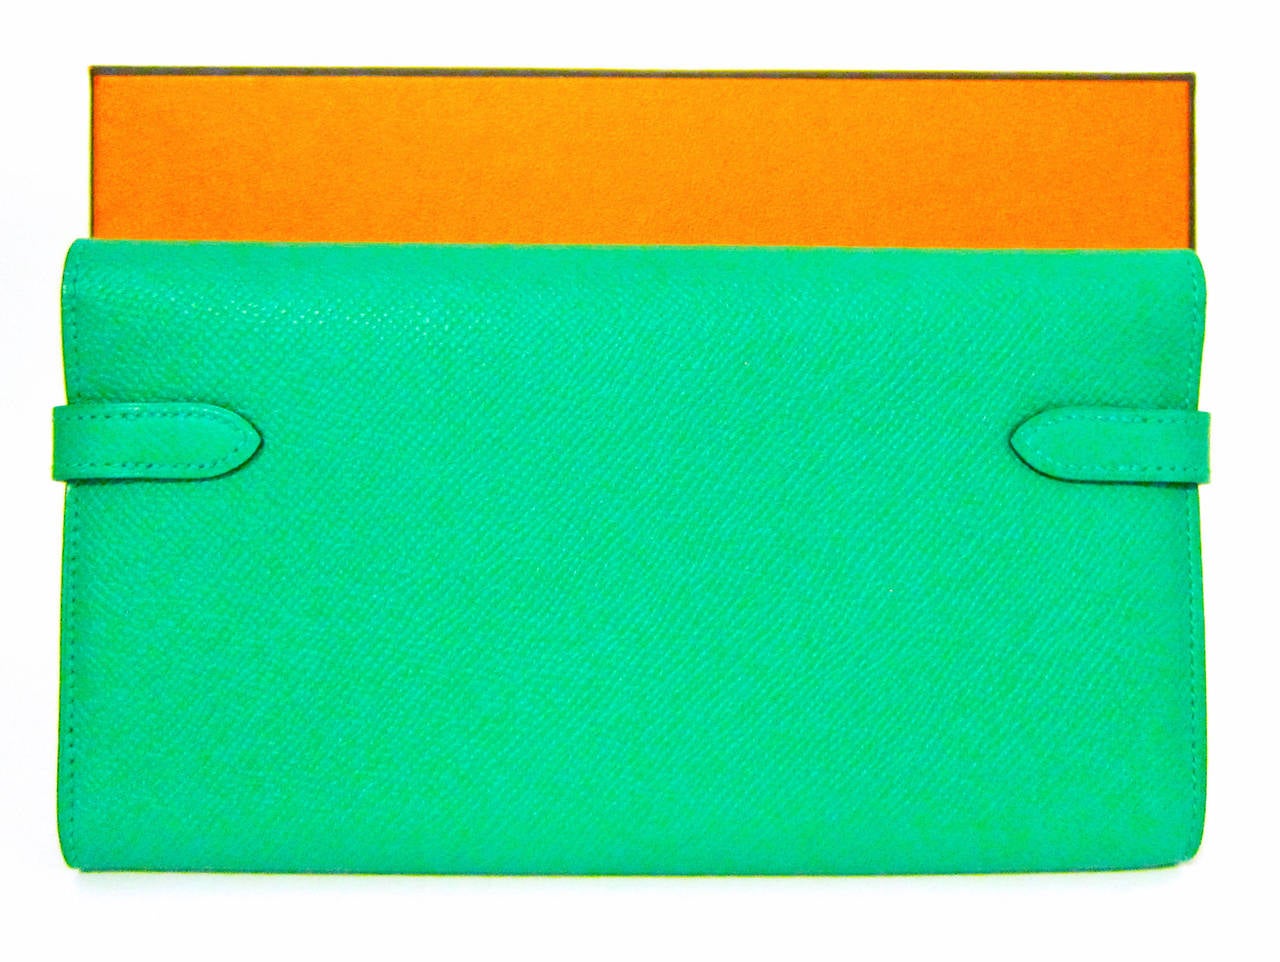 Hermes Bambou Epsom Kelly Wallet with Gold Hardware

Brand New in Box.  Store fresh.  
Comes with protective felt cover, Hermes box, and Hermes ribbon.  
Very desirable and rare color, leather, hardware combination
Bright Bambou green color